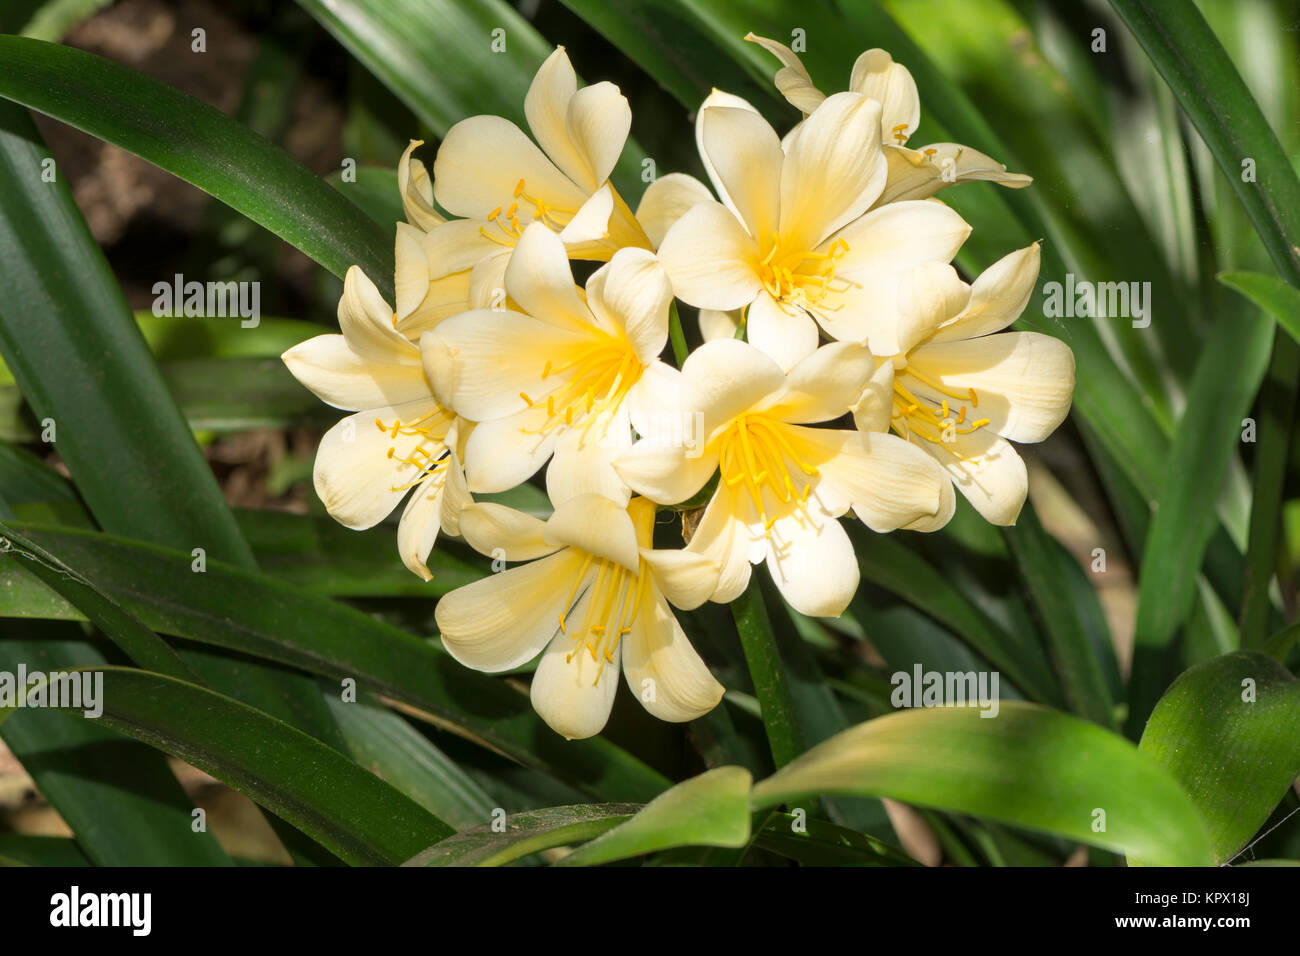 Yellow Flowering Clivia, possibly a Clivia Miniata. Growing in the garden. Stock Photo